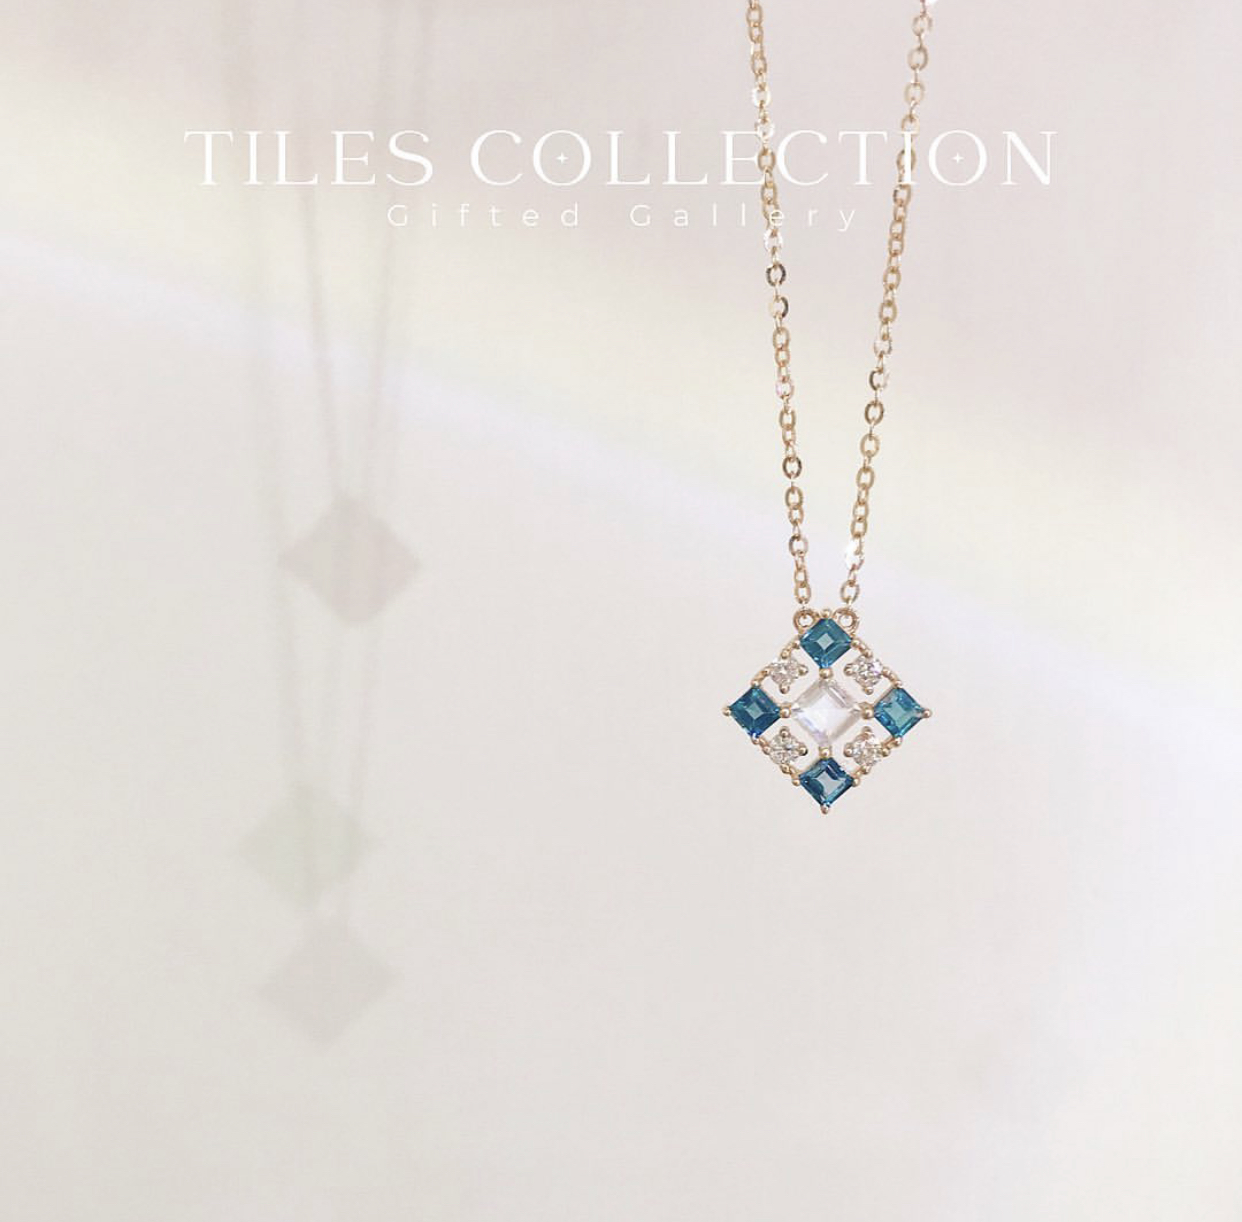 Tiles Collection in Topaz and Moonstone by Gifted Gallery